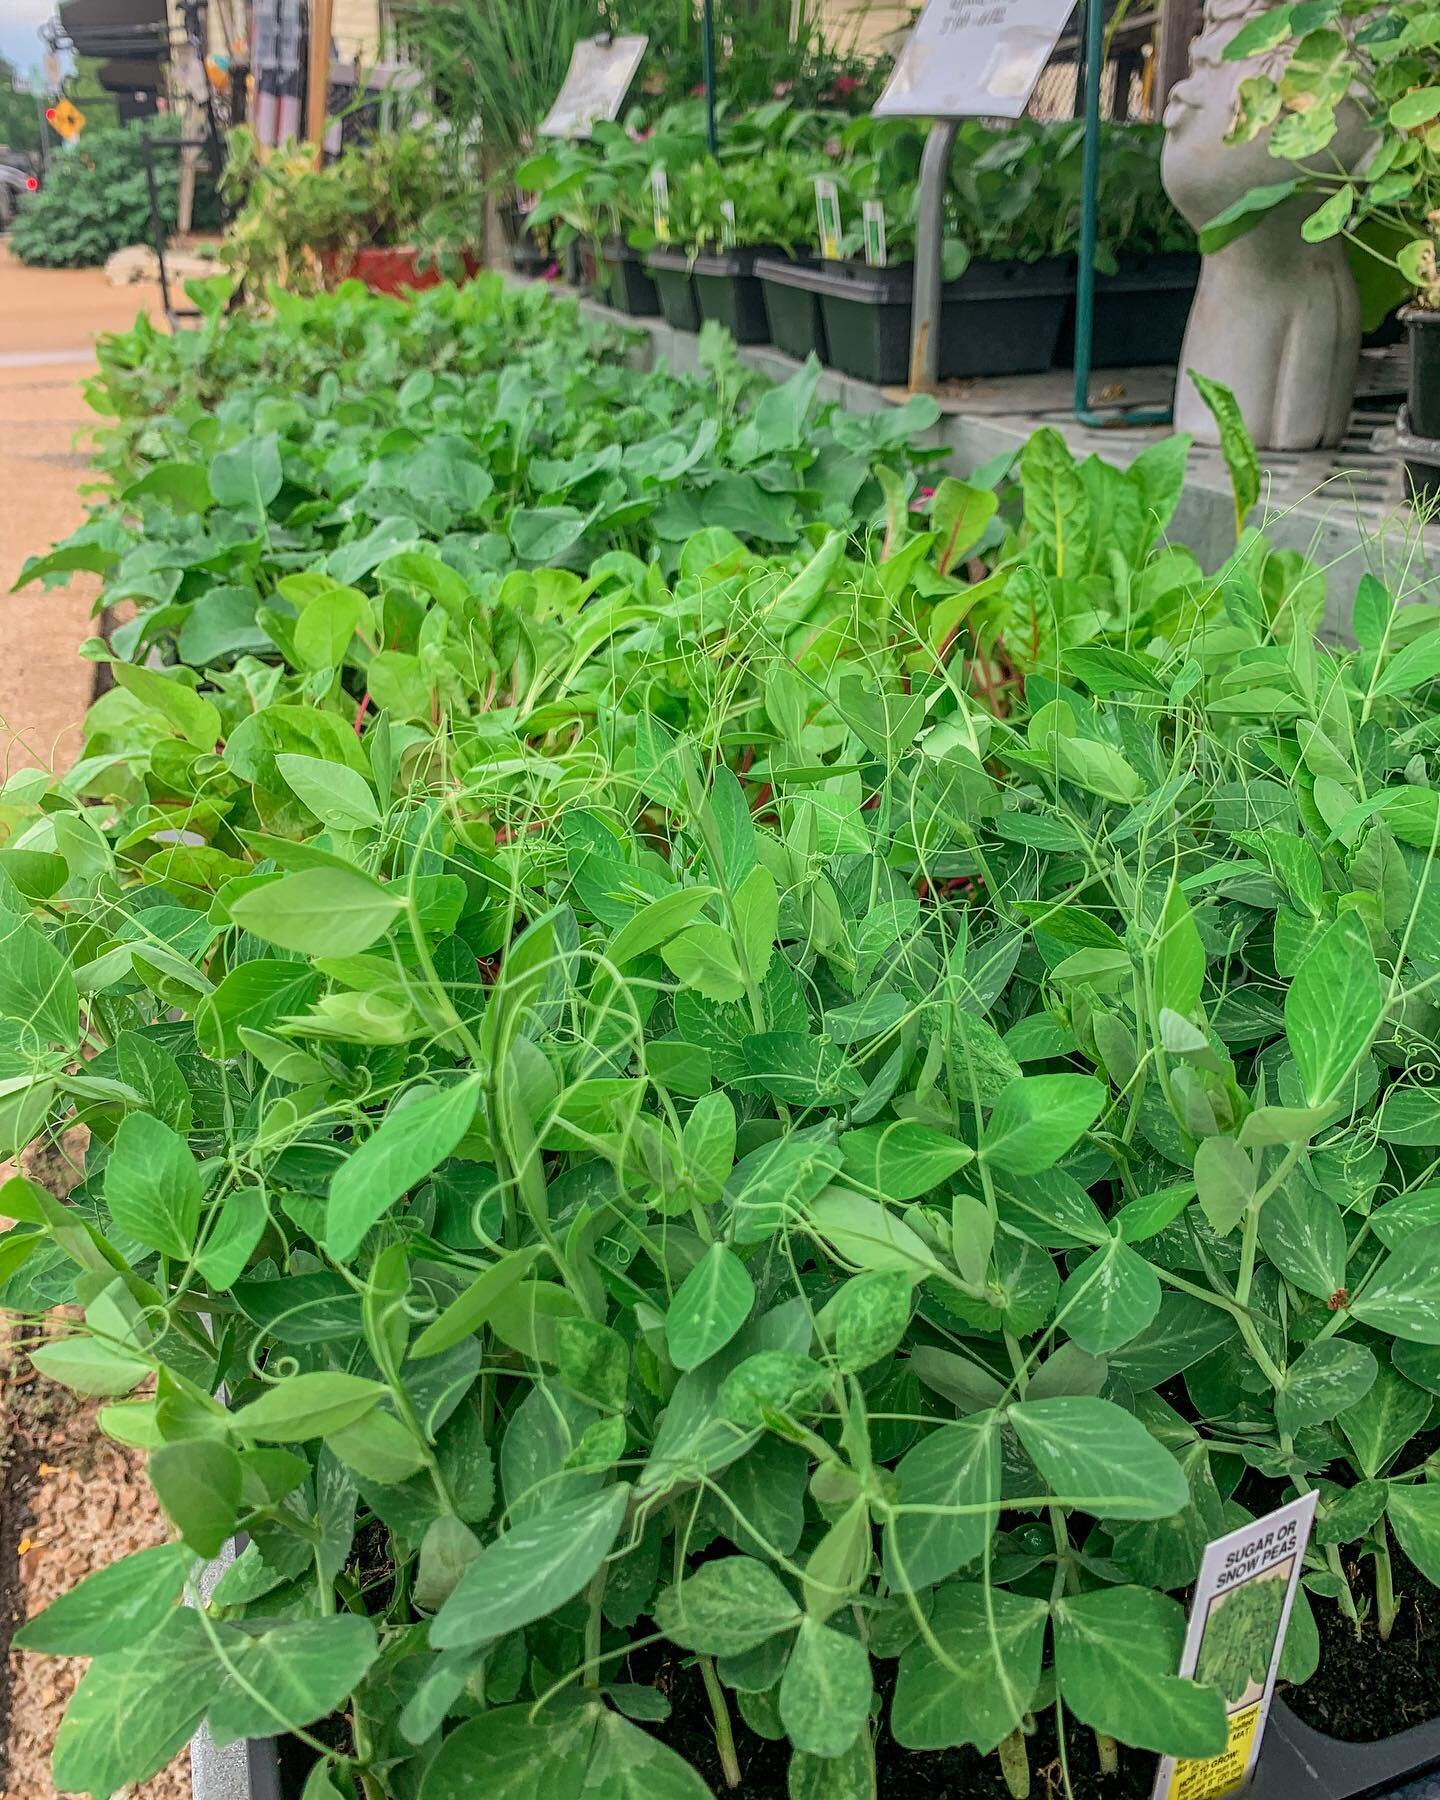 Fall veggies have started making their way into OK Hatchery! Find plants like Broccoli🥦, Kale, Snow Peas🫛, Spinach, Cabbage🥬, and more to come through September!